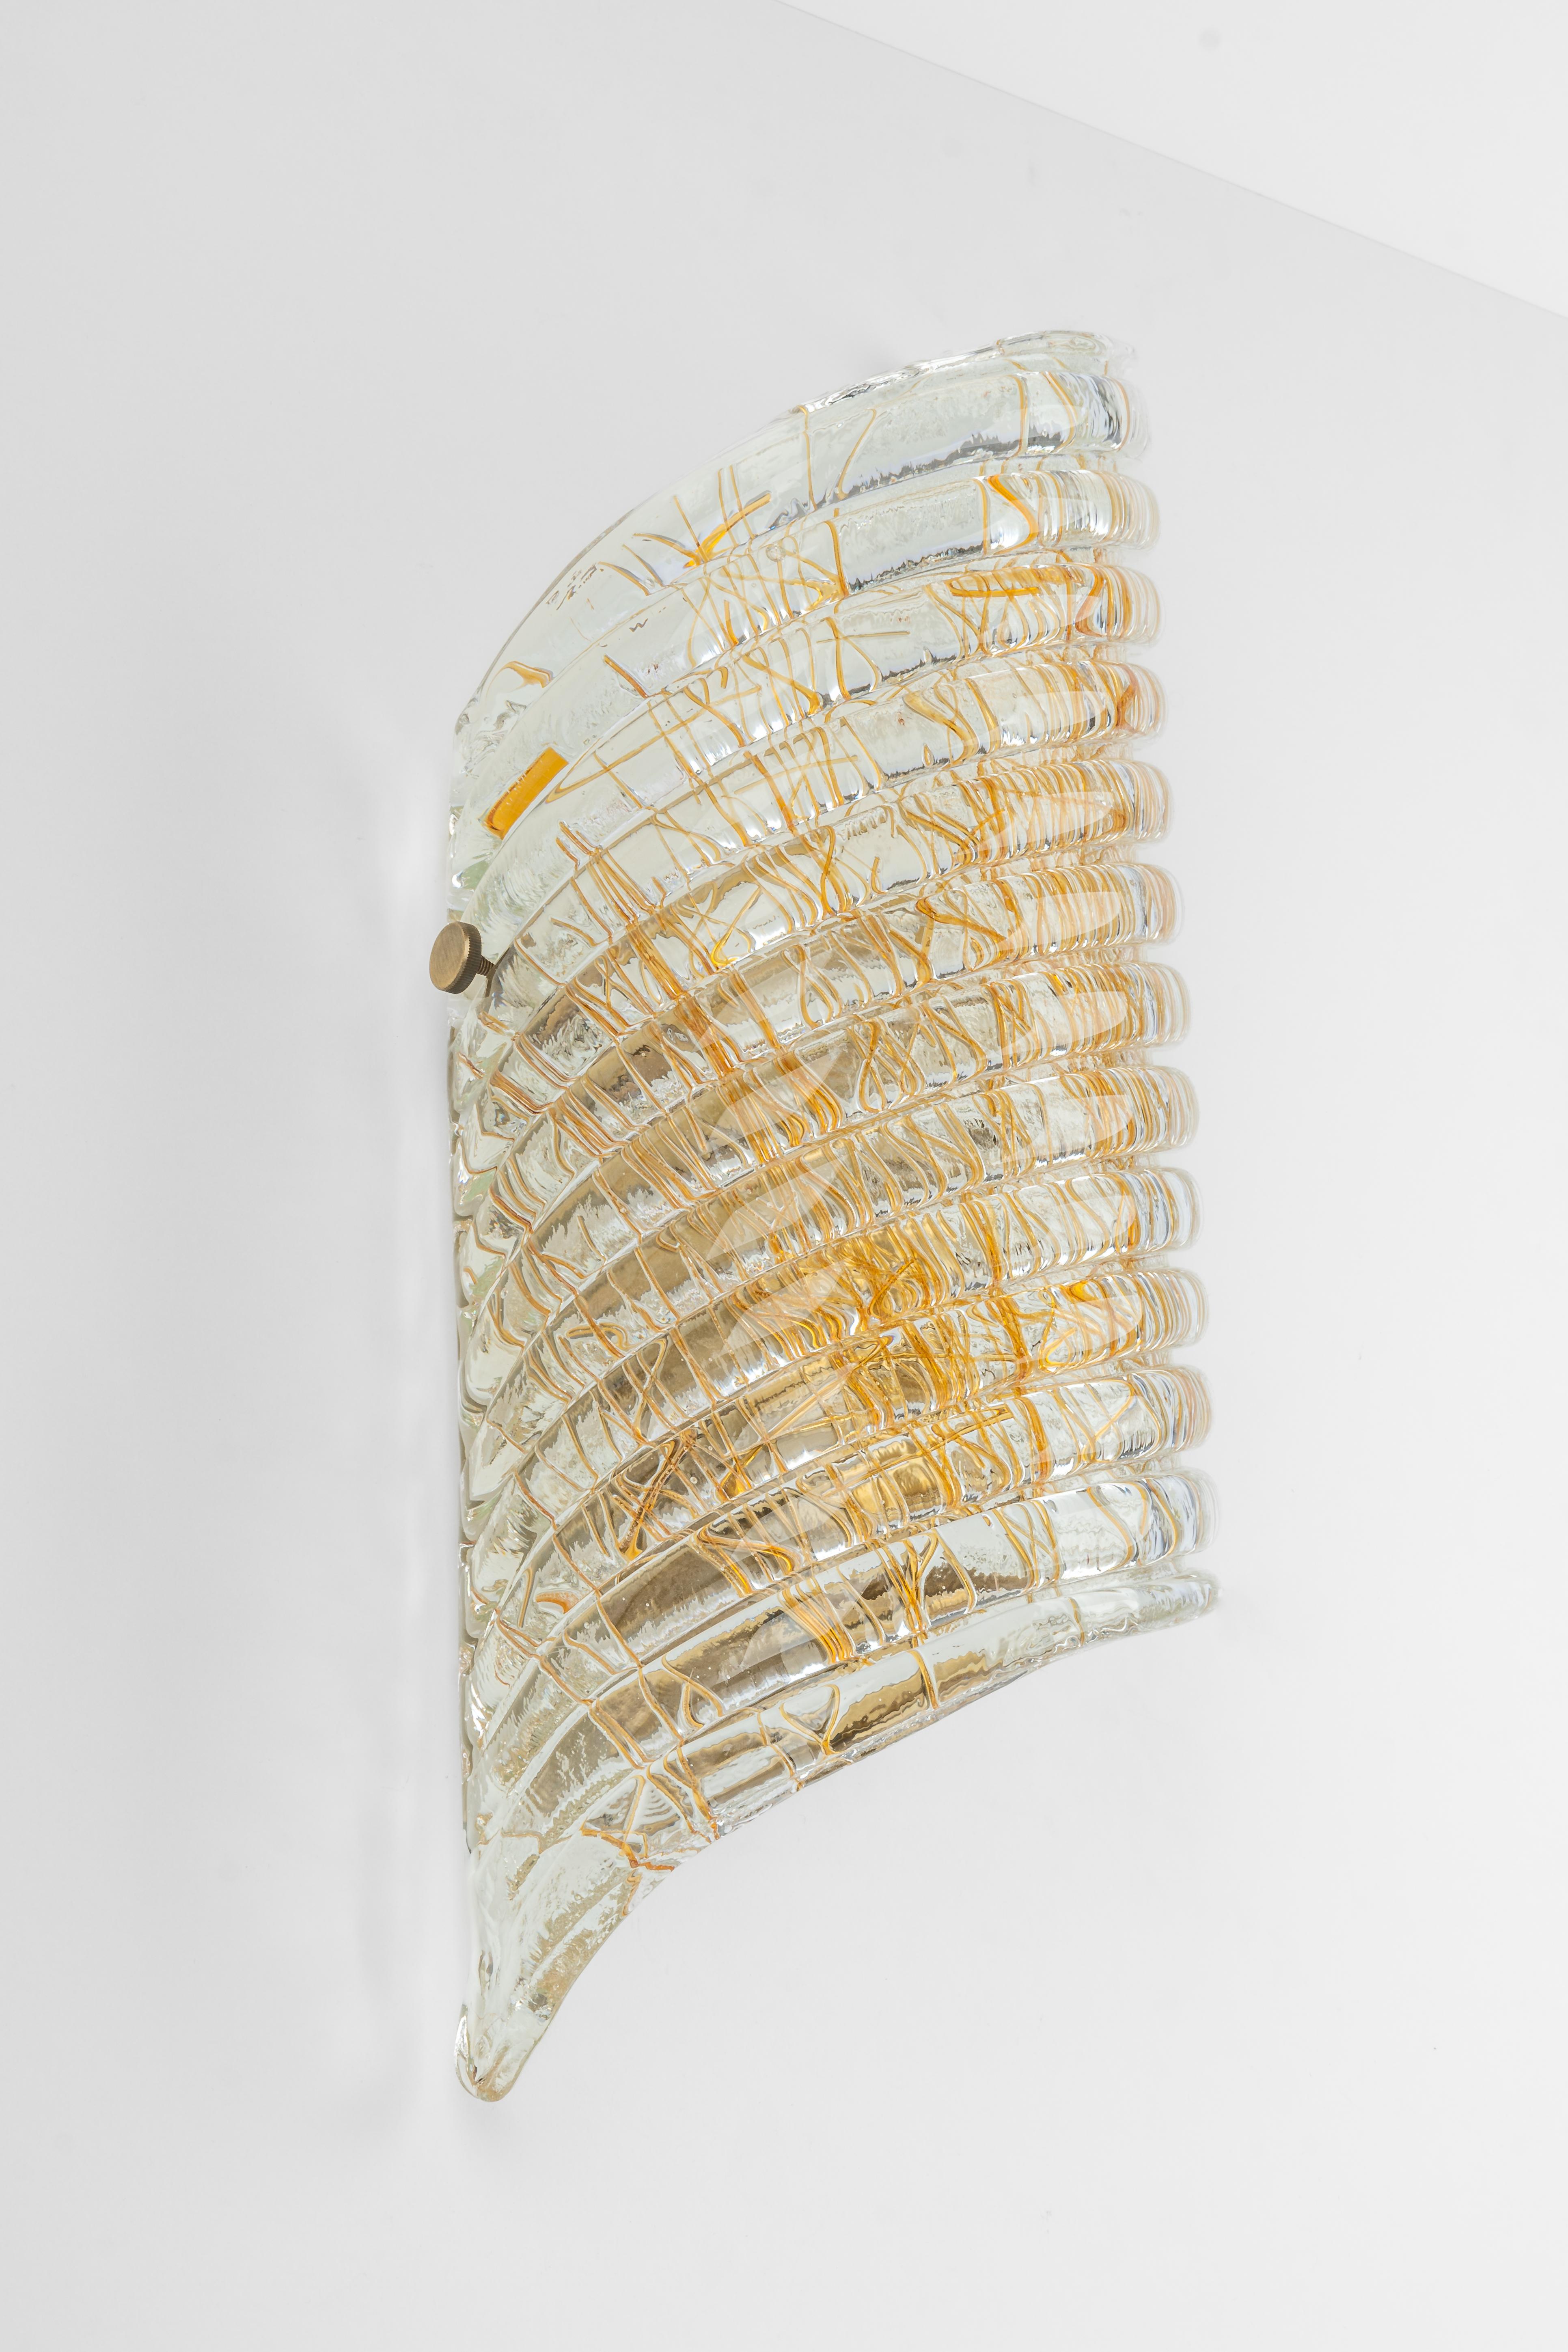 Mid-Century Modern Single Large Murano Brass Sconce by Hillebrand, Germany, 1970s For Sale